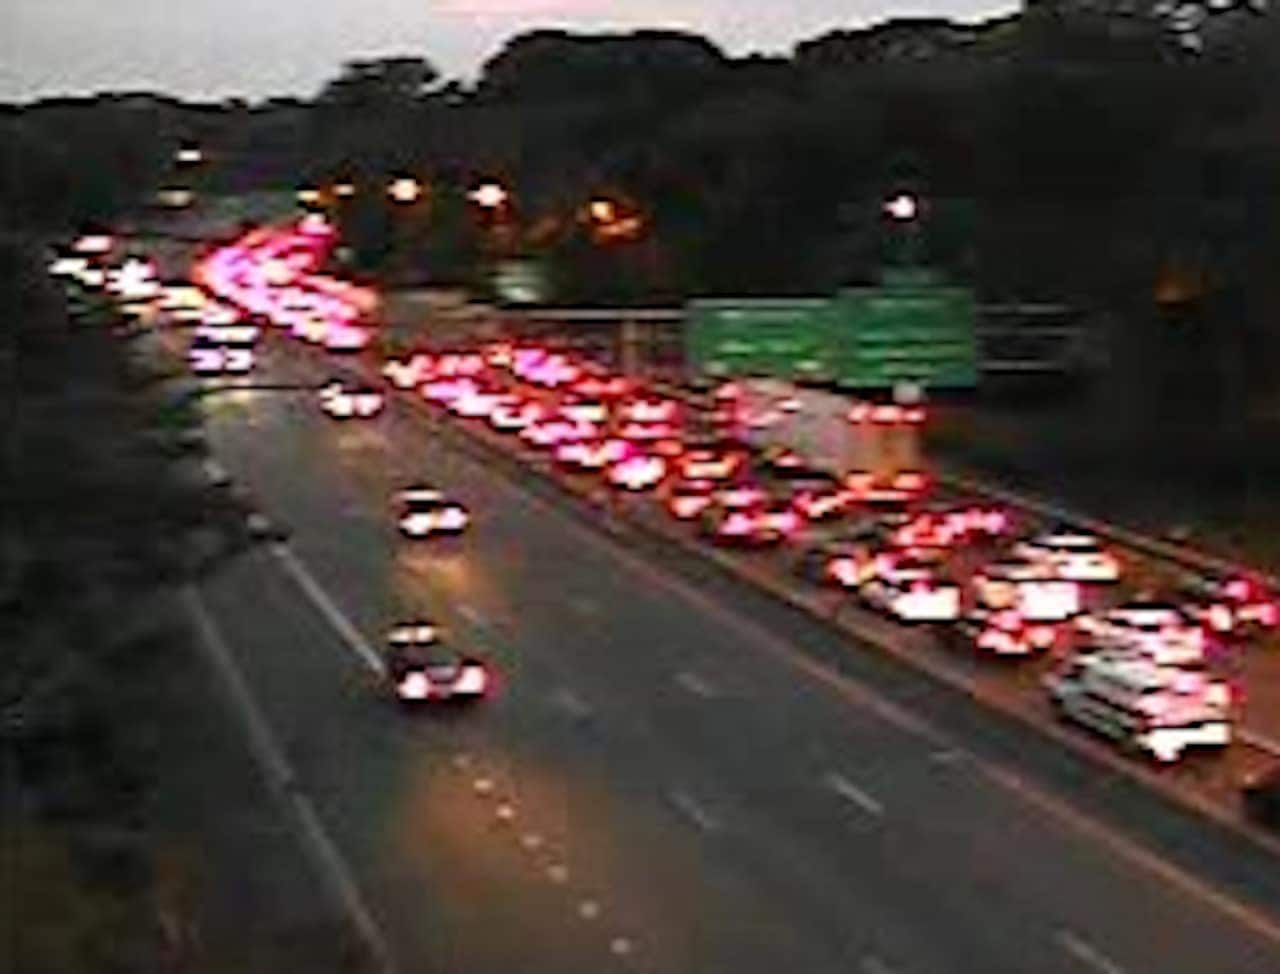 A look at the delays on I-95 Thursday night after the fatal crash.